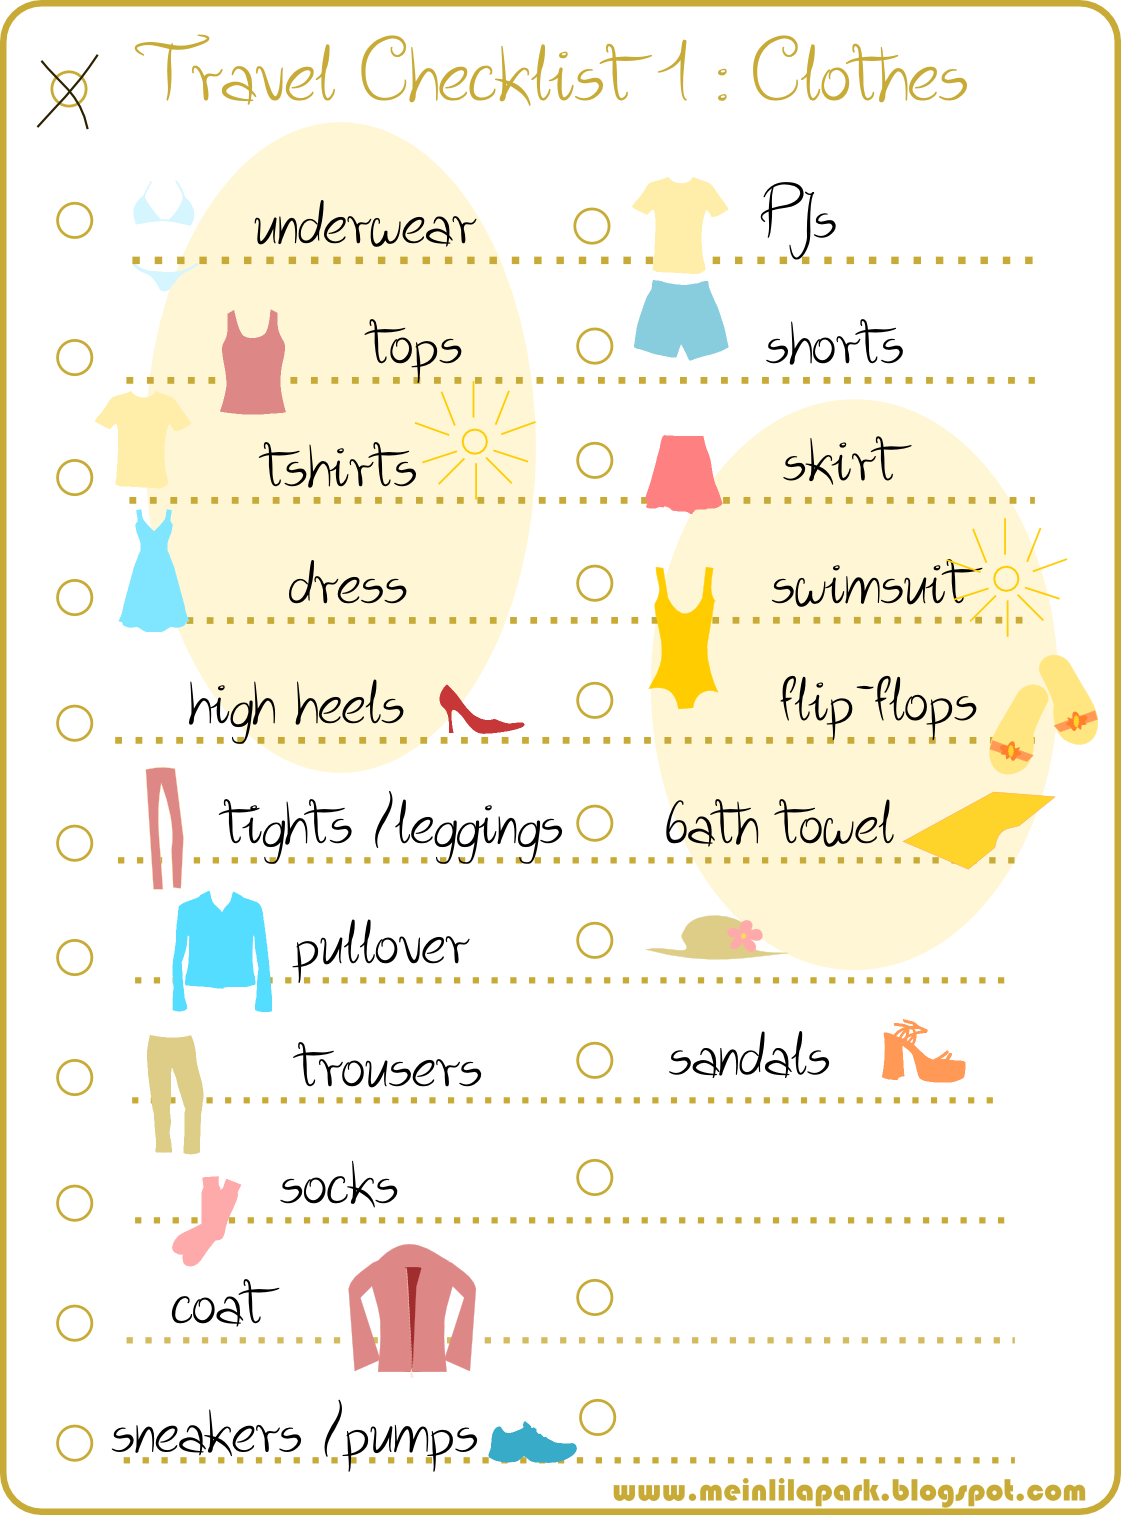 Download free printable travel checklist part 1: clothes - colorful ...